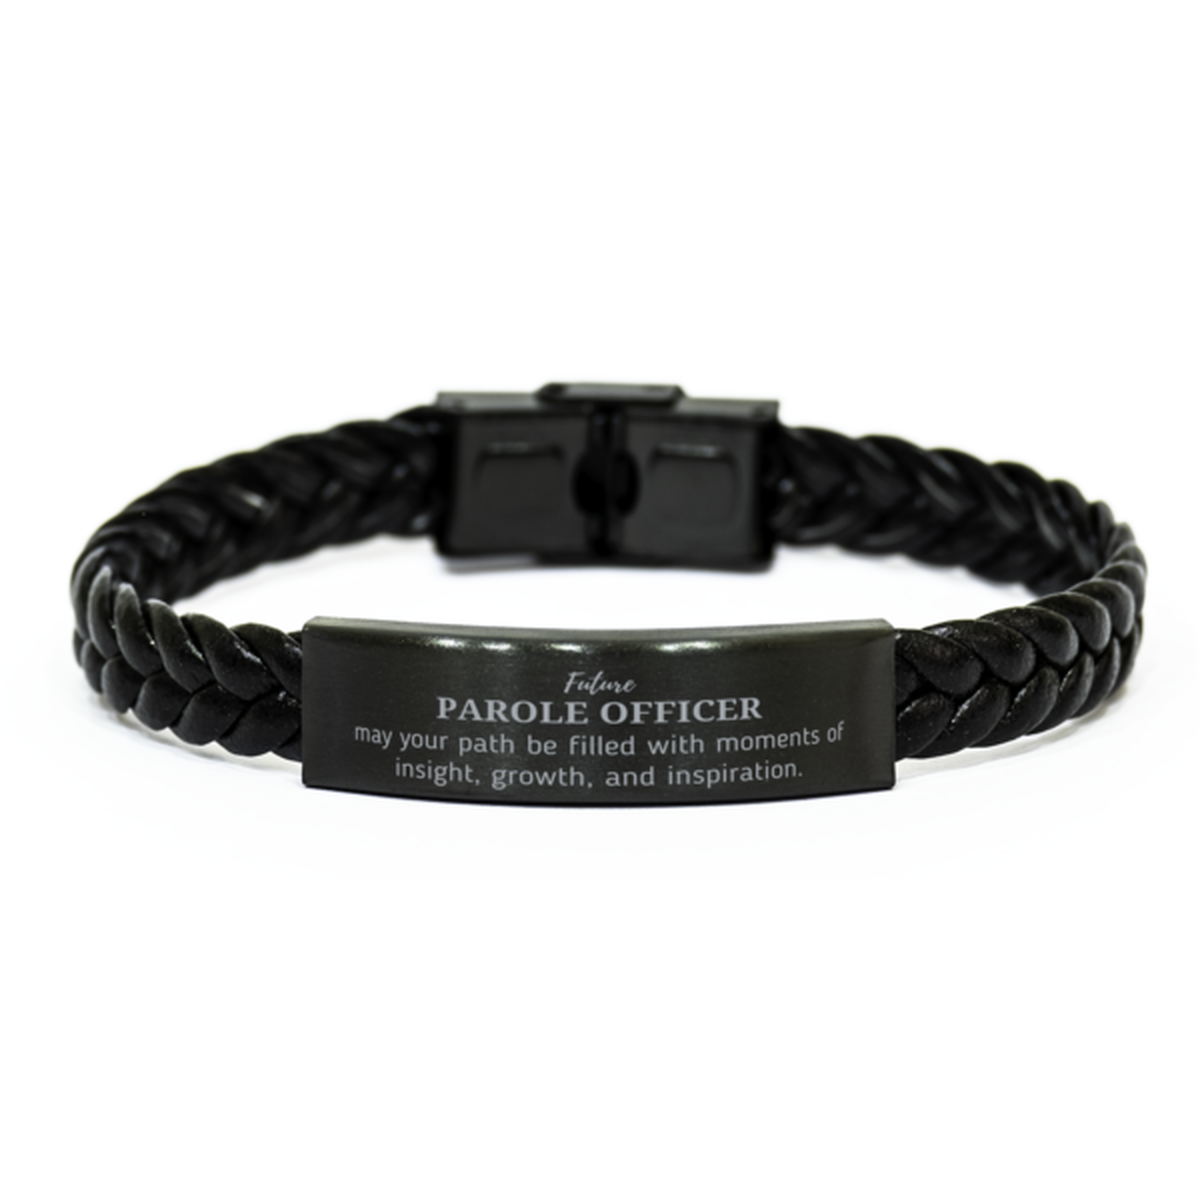 Future Parole Officer Gifts, May your path be filled with moments of insight, Graduation Gifts for New Parole Officer, Christmas Unique Braided Leather Bracelet For Men, Women, Friends